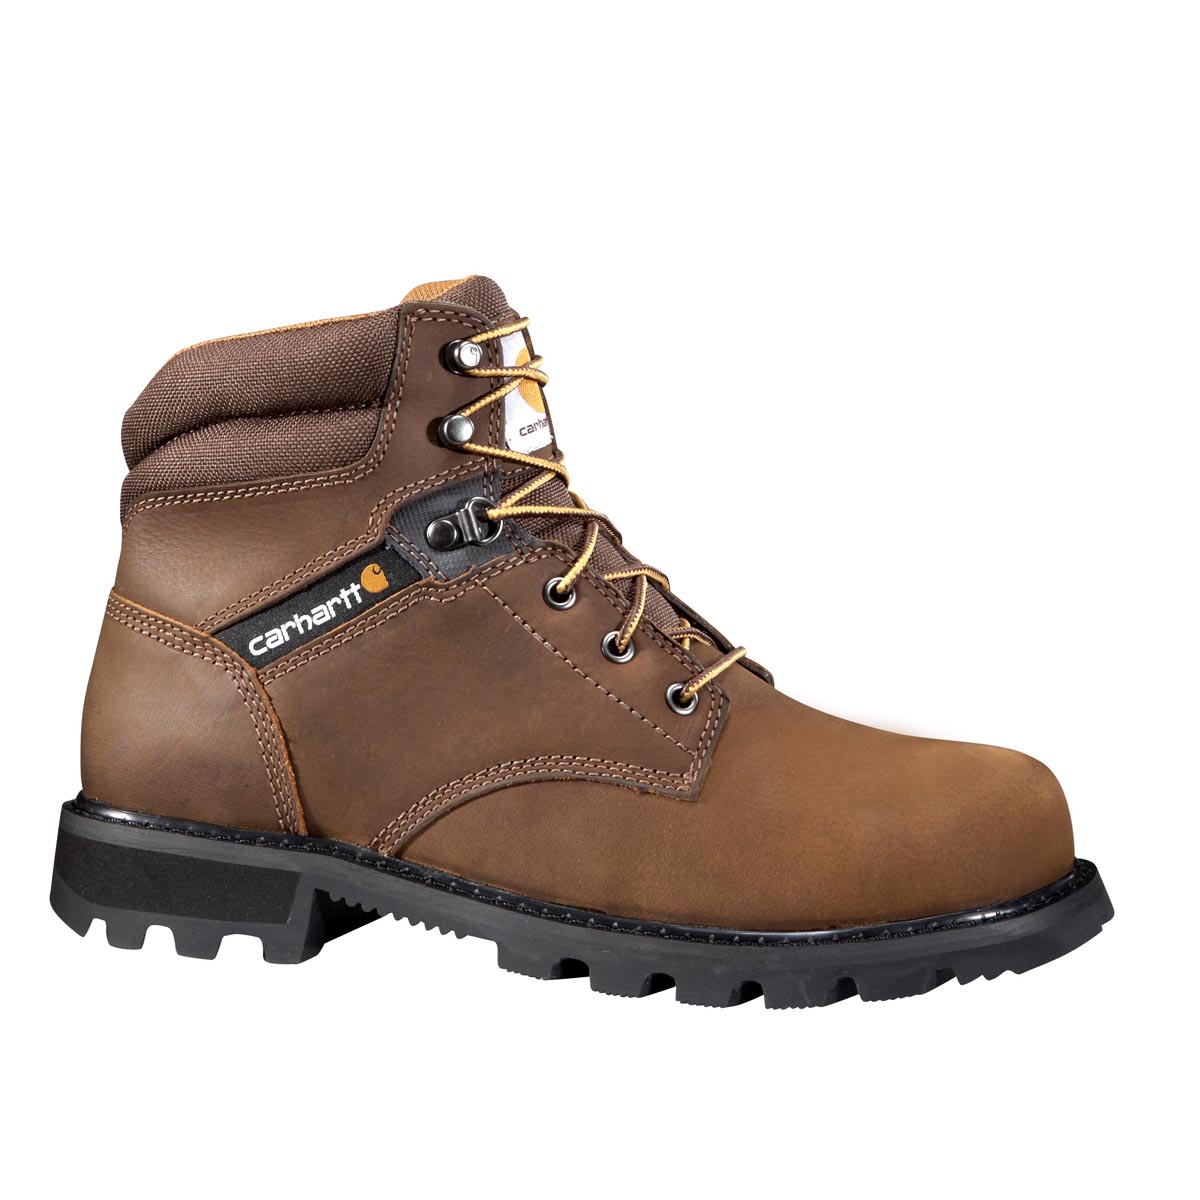 Carhartt Men's 6 Inch Brown Work Boot Non Safety Toe